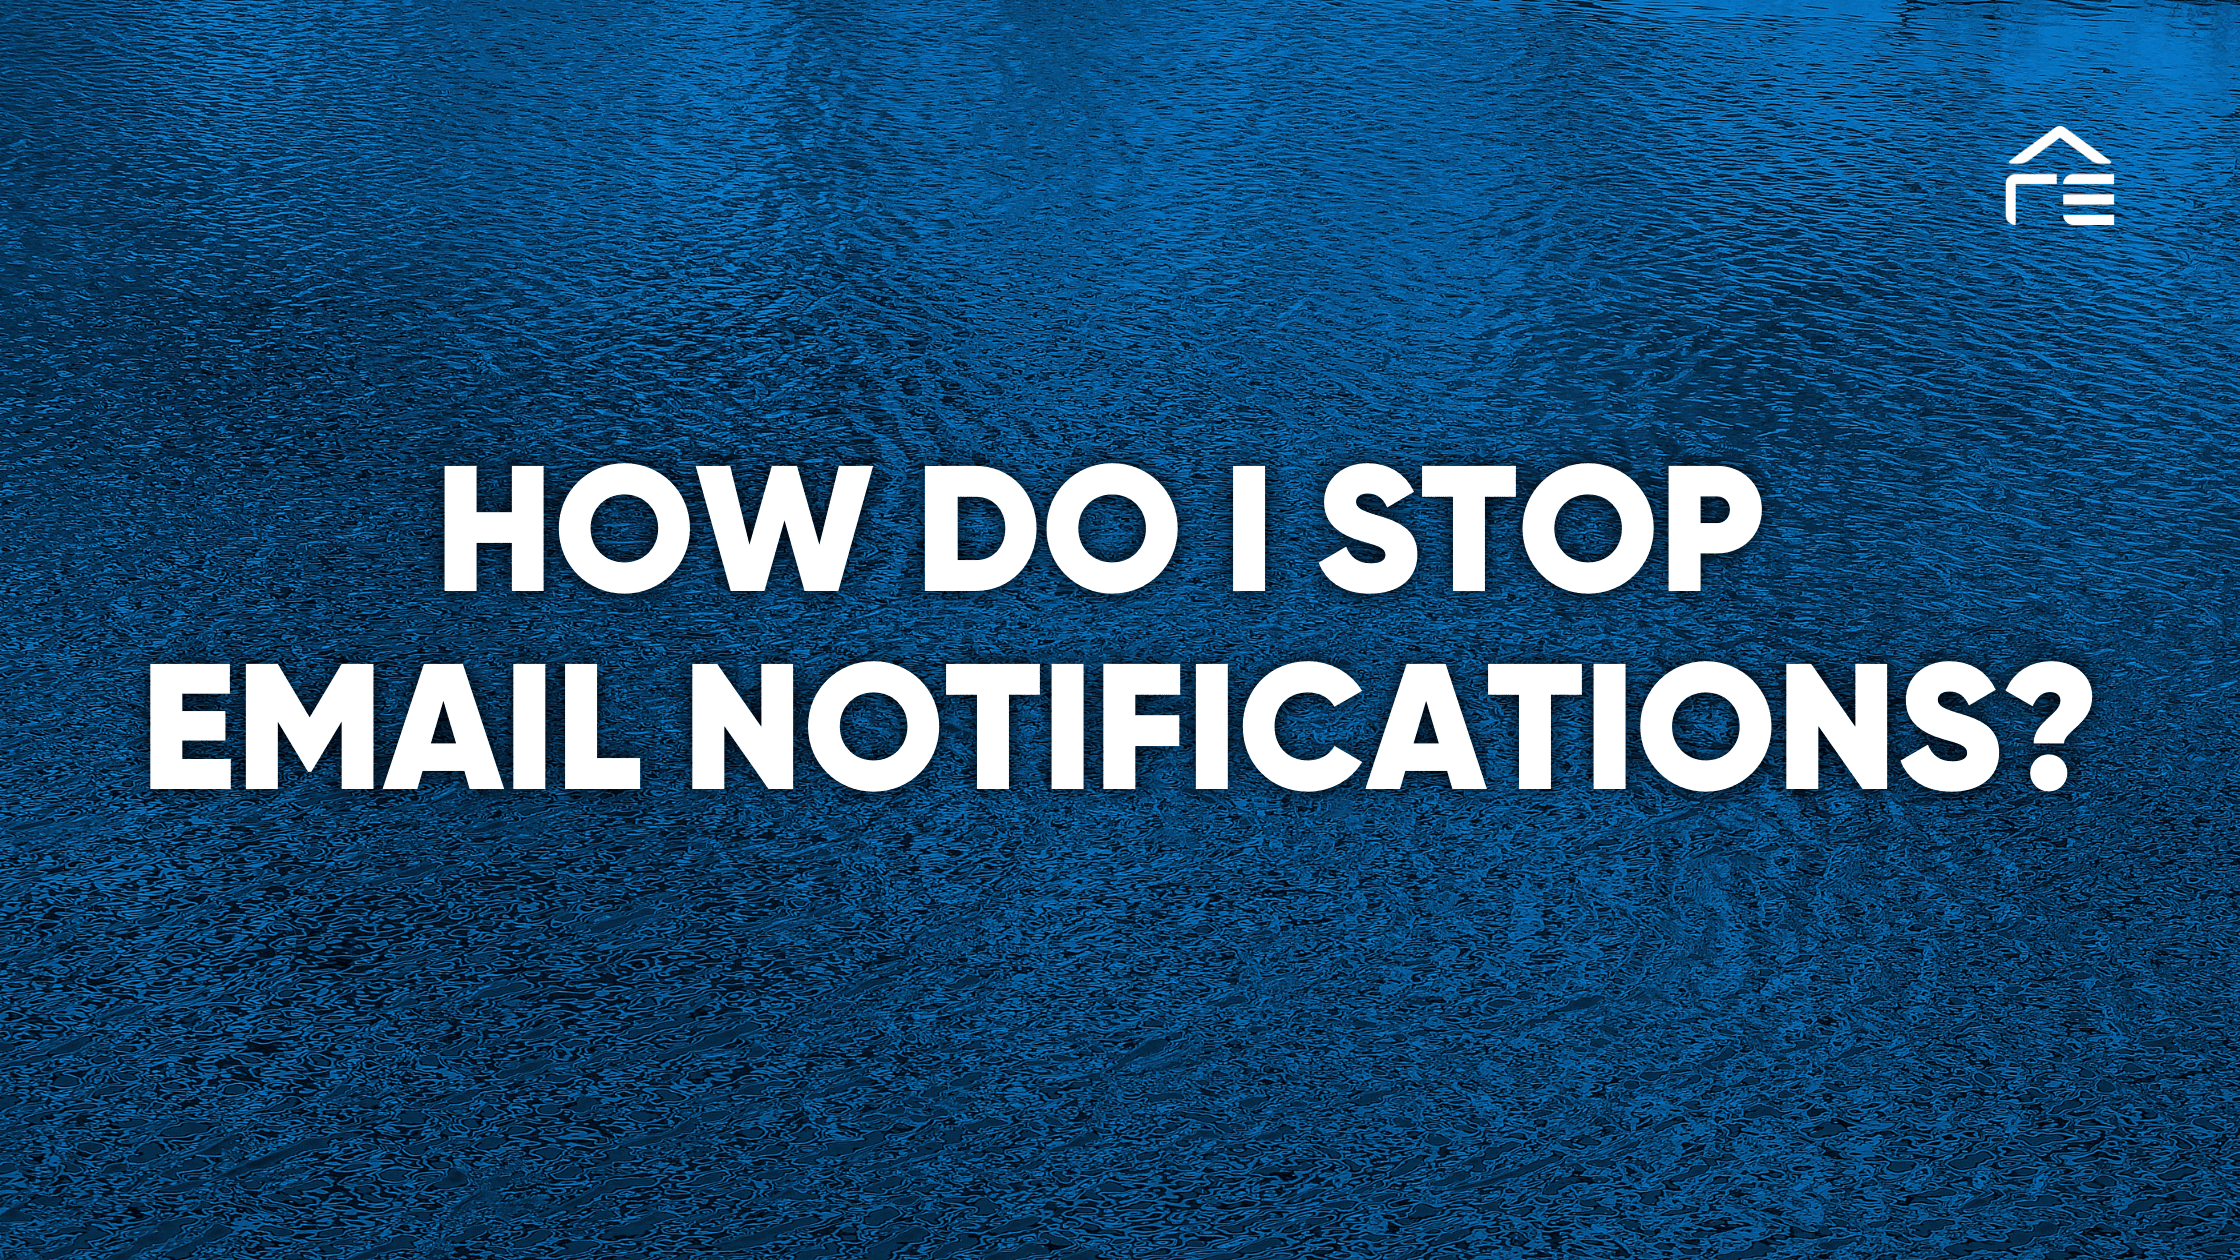 How Do I Stop Email Notifications?